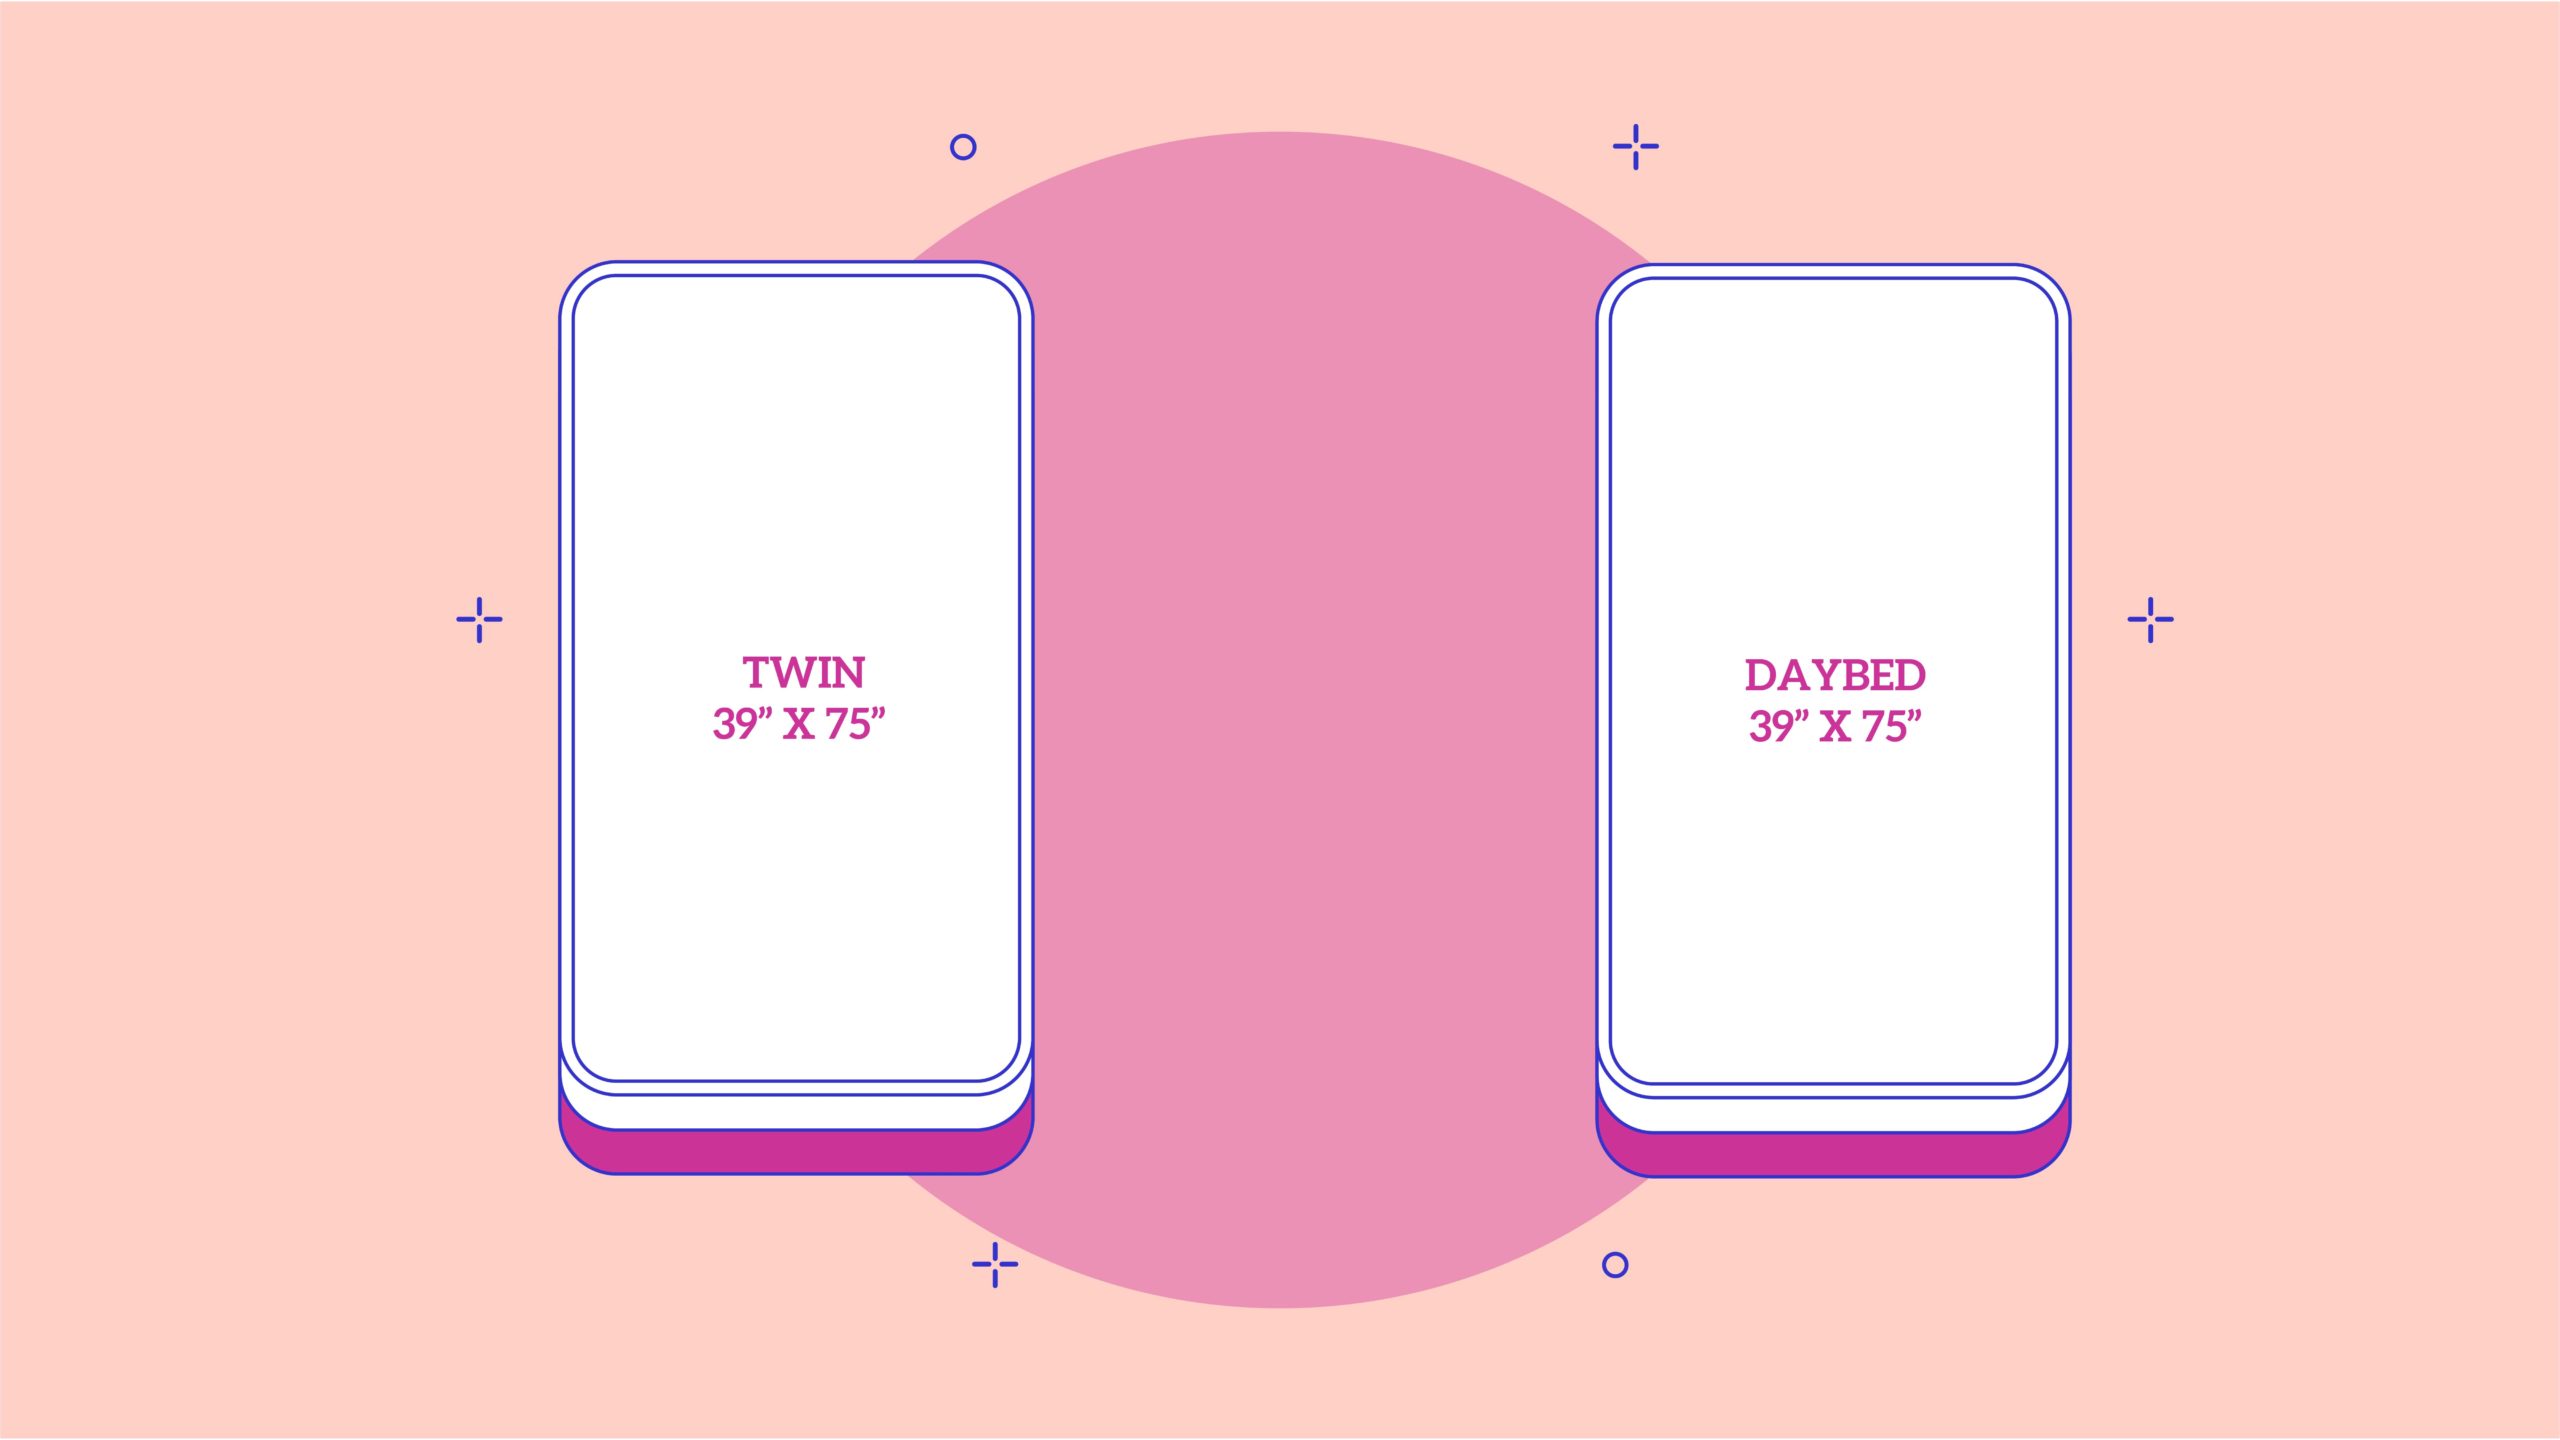 Daybed Mattress Vs Twin What, Toddler Bed Size Vs Twin